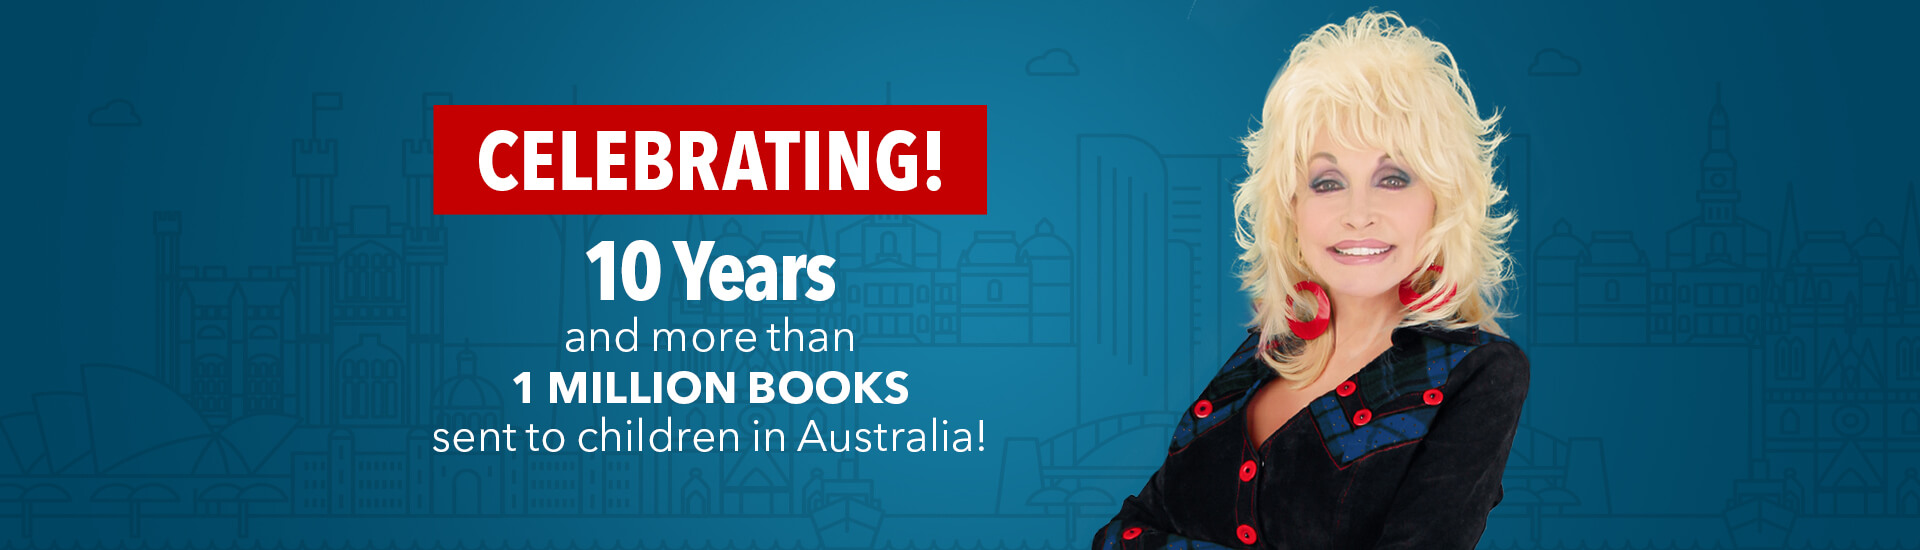 Celebrating 10 years and more than 1 million books sent to children in Australia